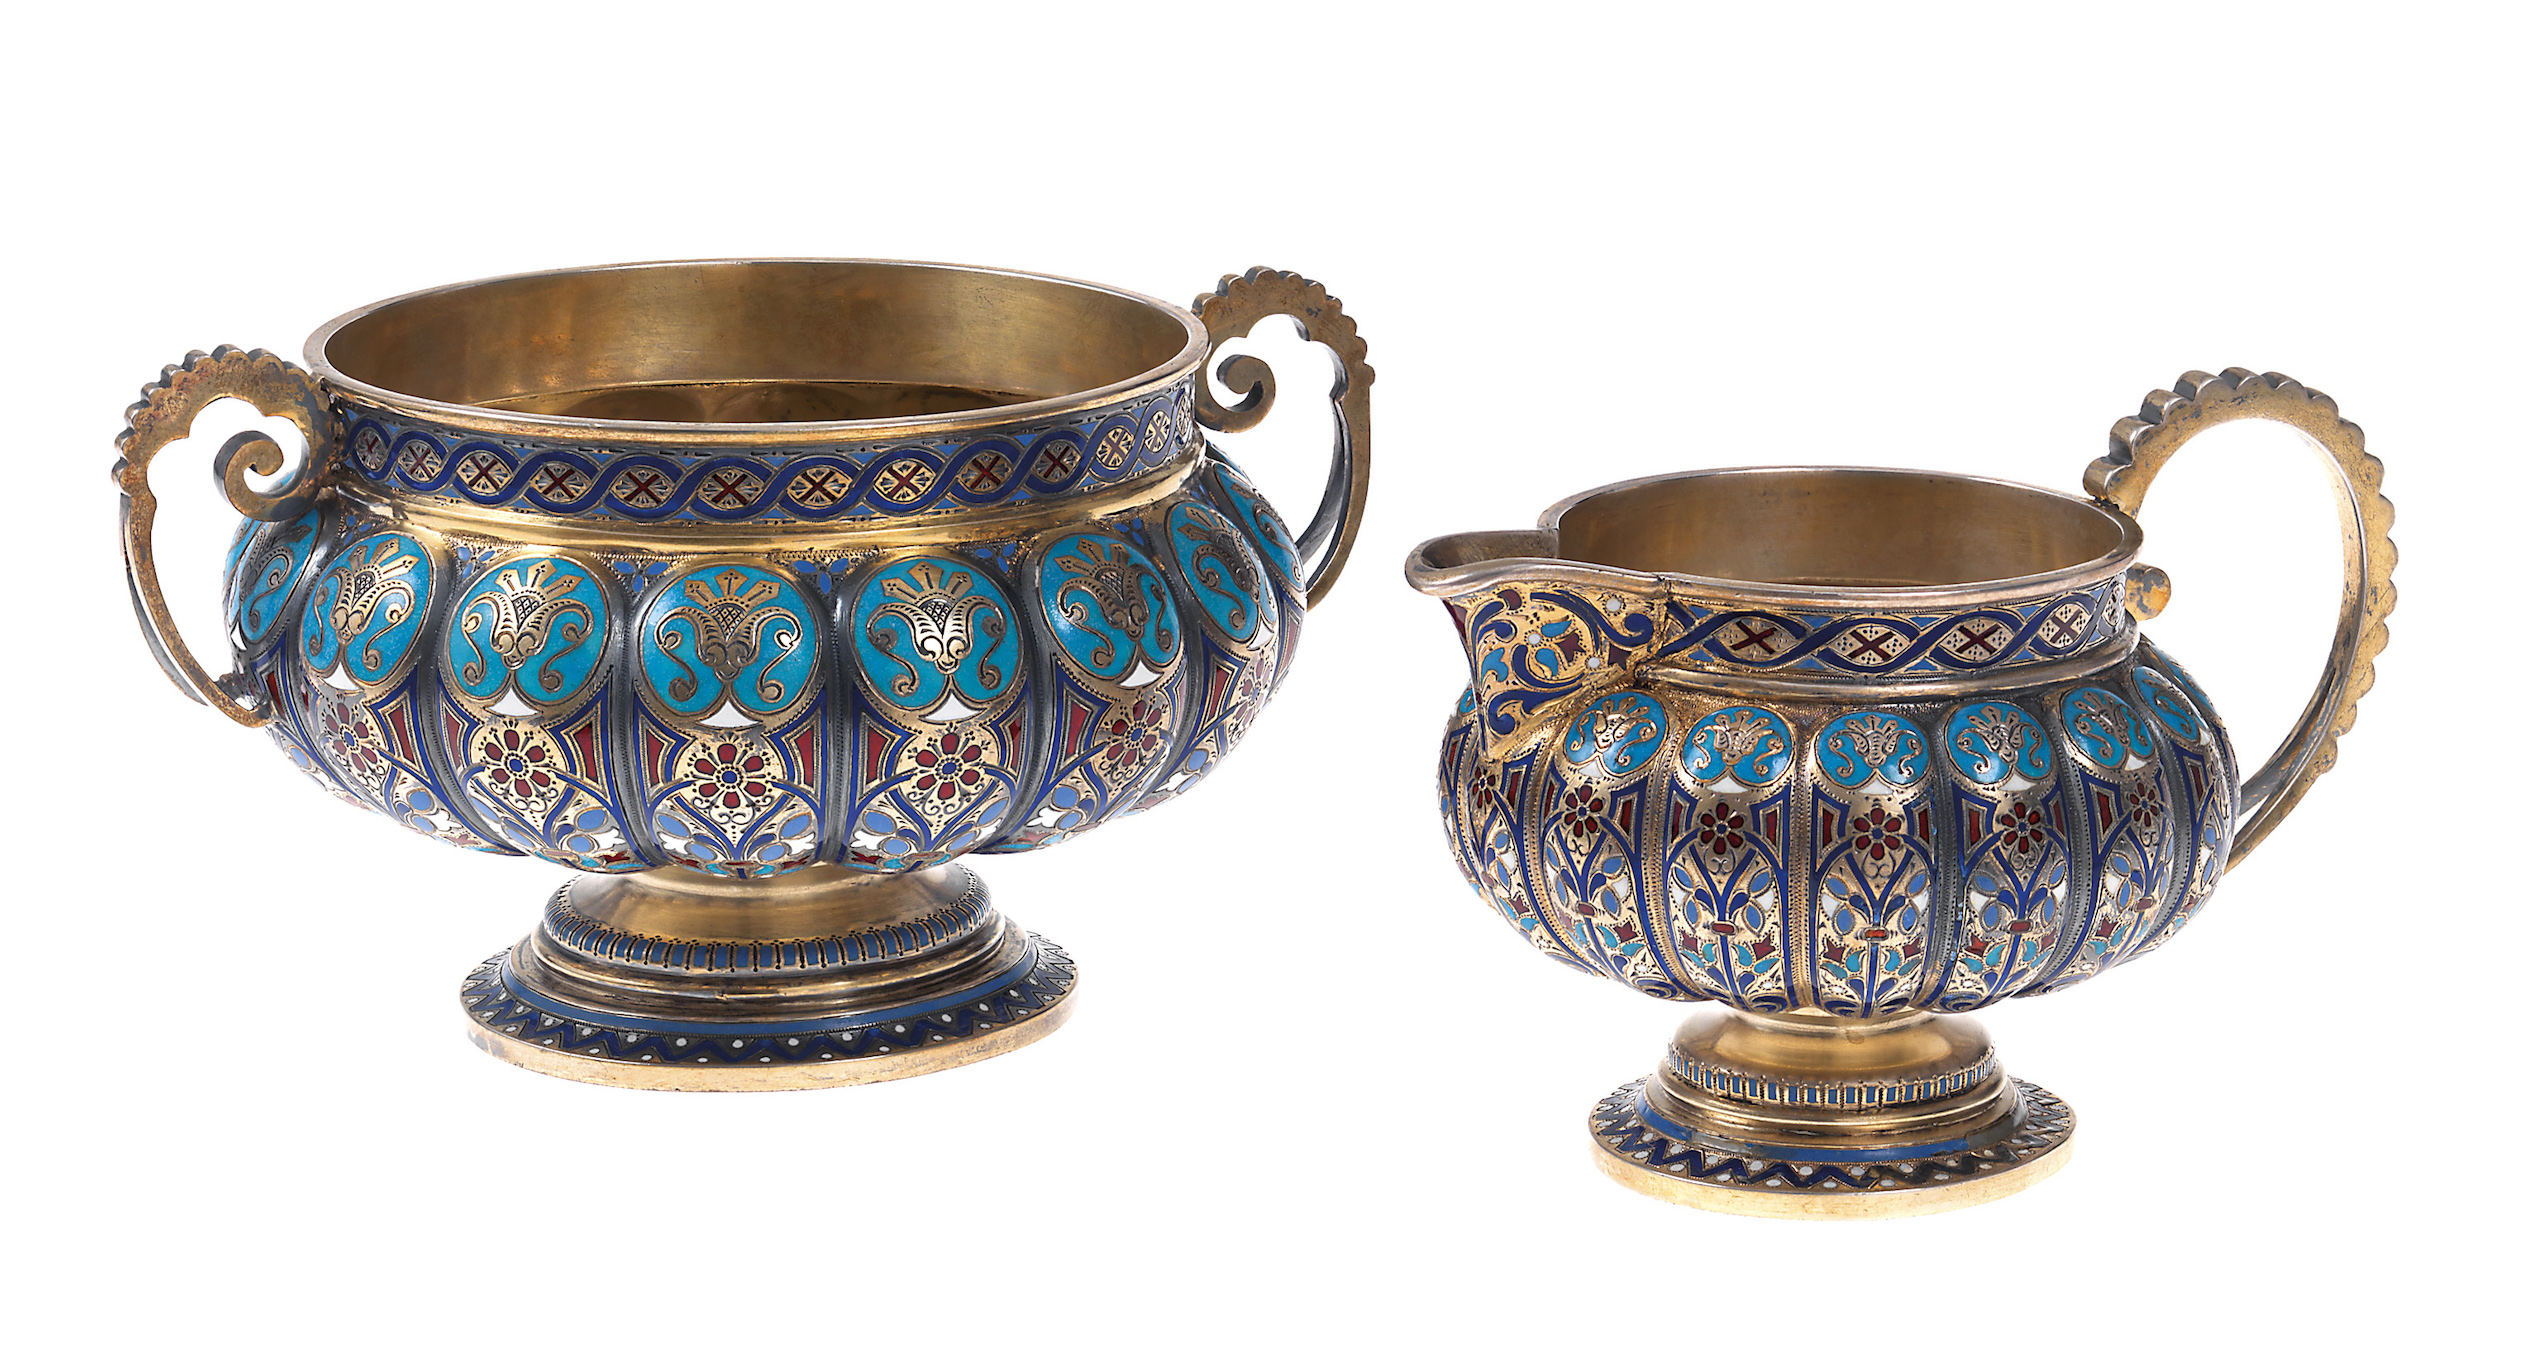 * A Russian Silver-Gilt and Cloisonné Enamel Sugar Bowl and a Creamer   MAKER’S MARK ‘AK’ IN